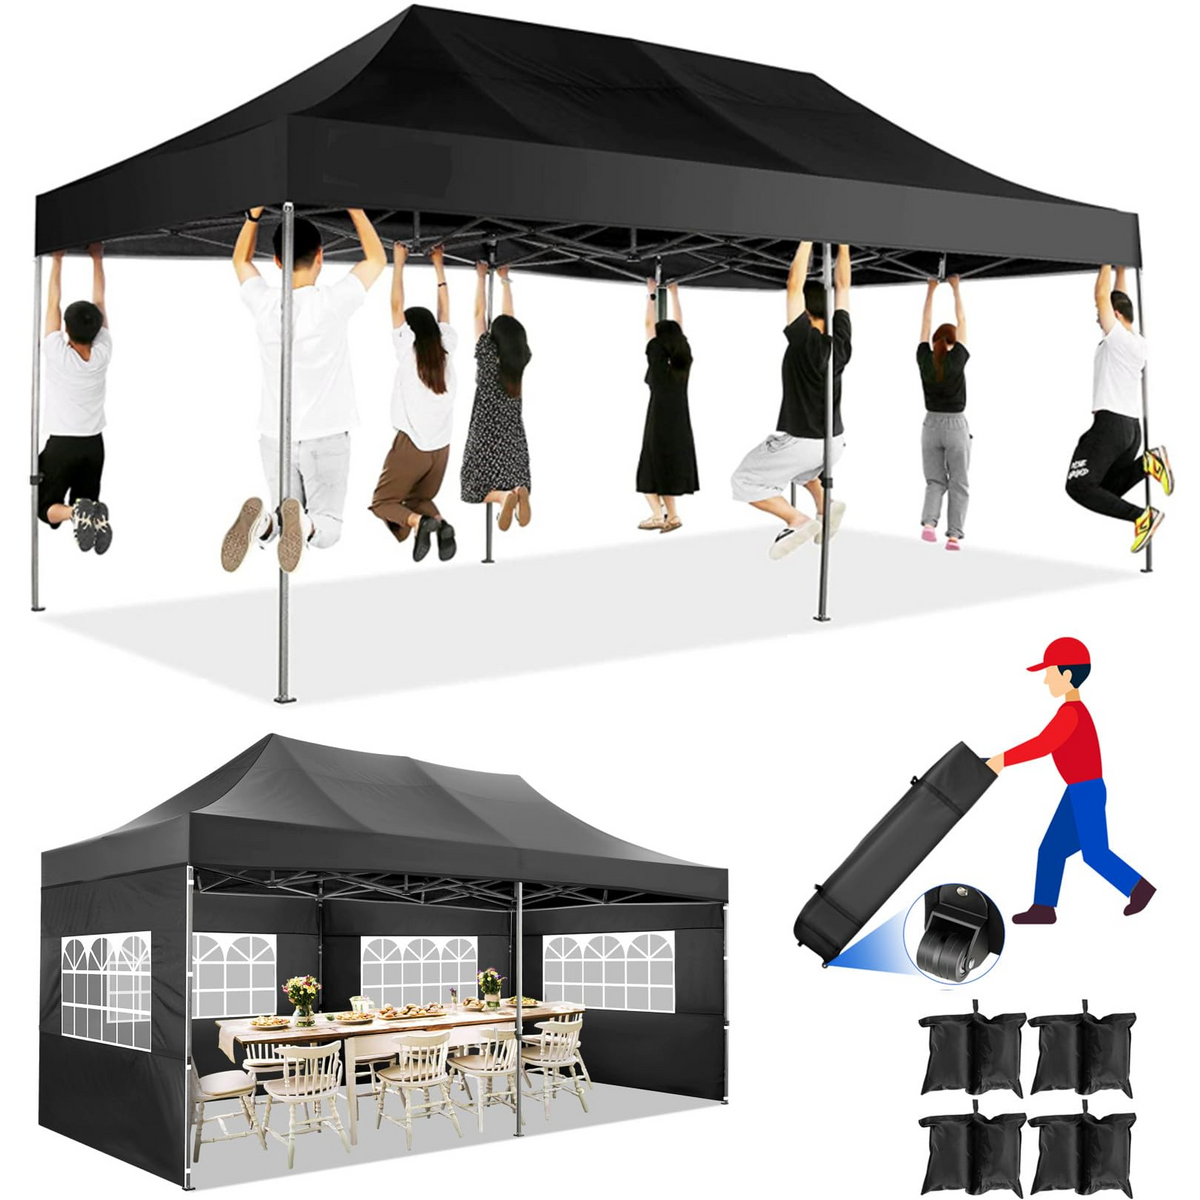 COBIZI 10x20 Pop up Canopy with 6 sidewalls Commercial Heavy Duty Canopy UPF 50+ All Weather Waterproof Outdoor Wedding Party Tents Gazebo with Roller Bag, Black